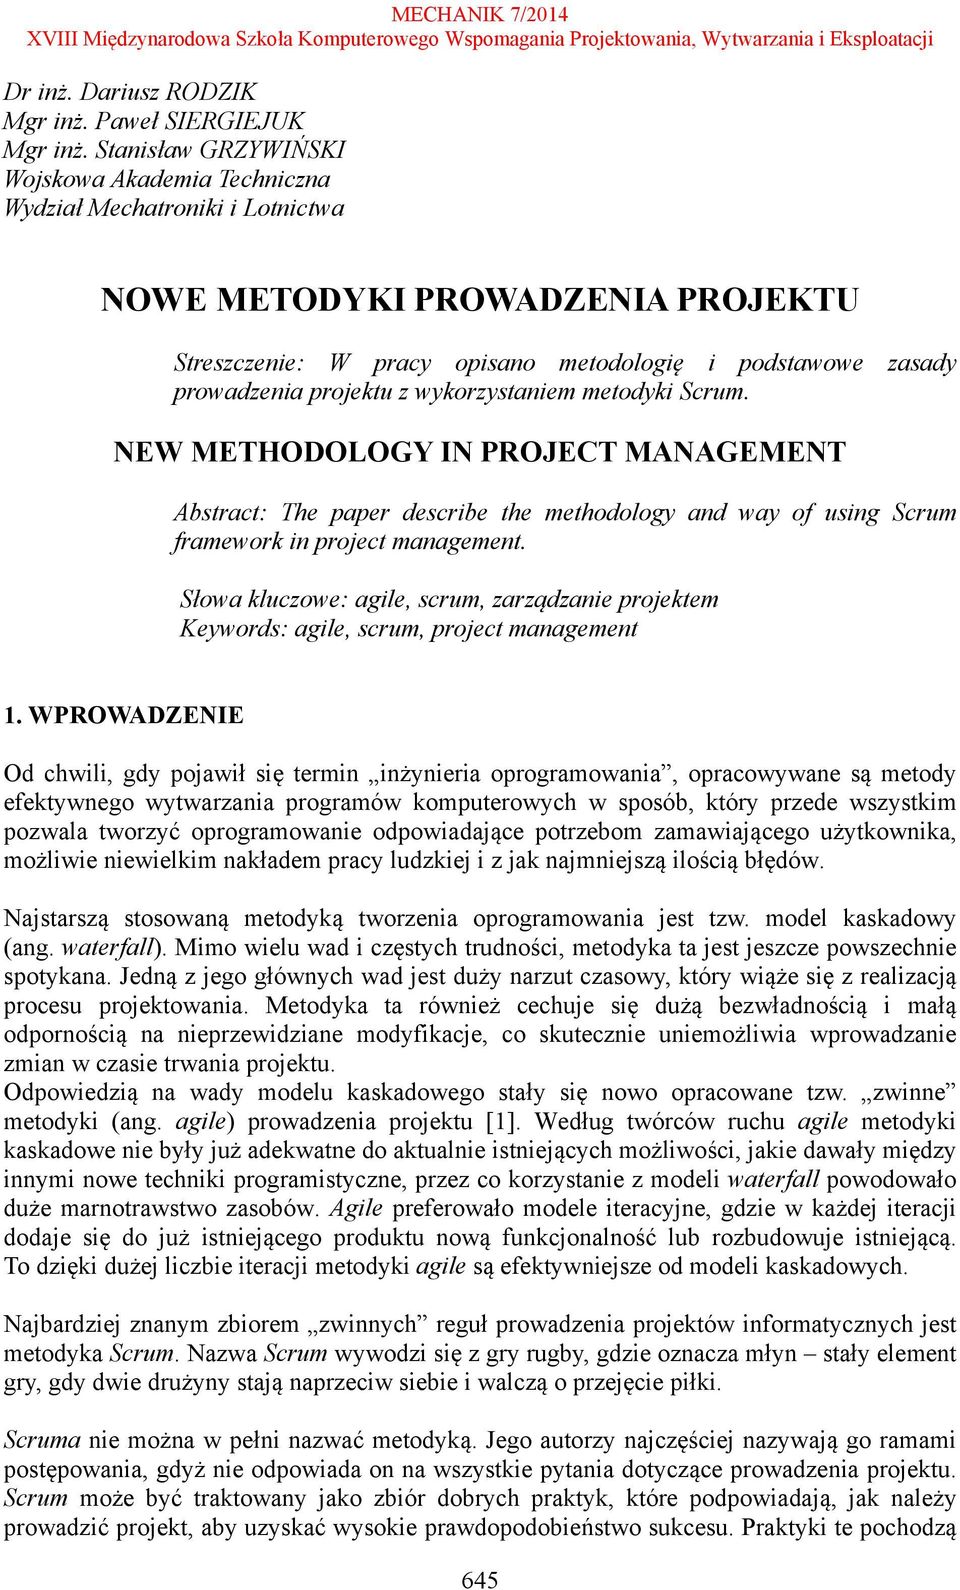 projektu z wykorzystaniem metodyki Scrum. NEW METHODOLOGY IN PROJECT MANAGEMENT Abstract: The paper describe the methodology and way of using Scrum framework in project management.